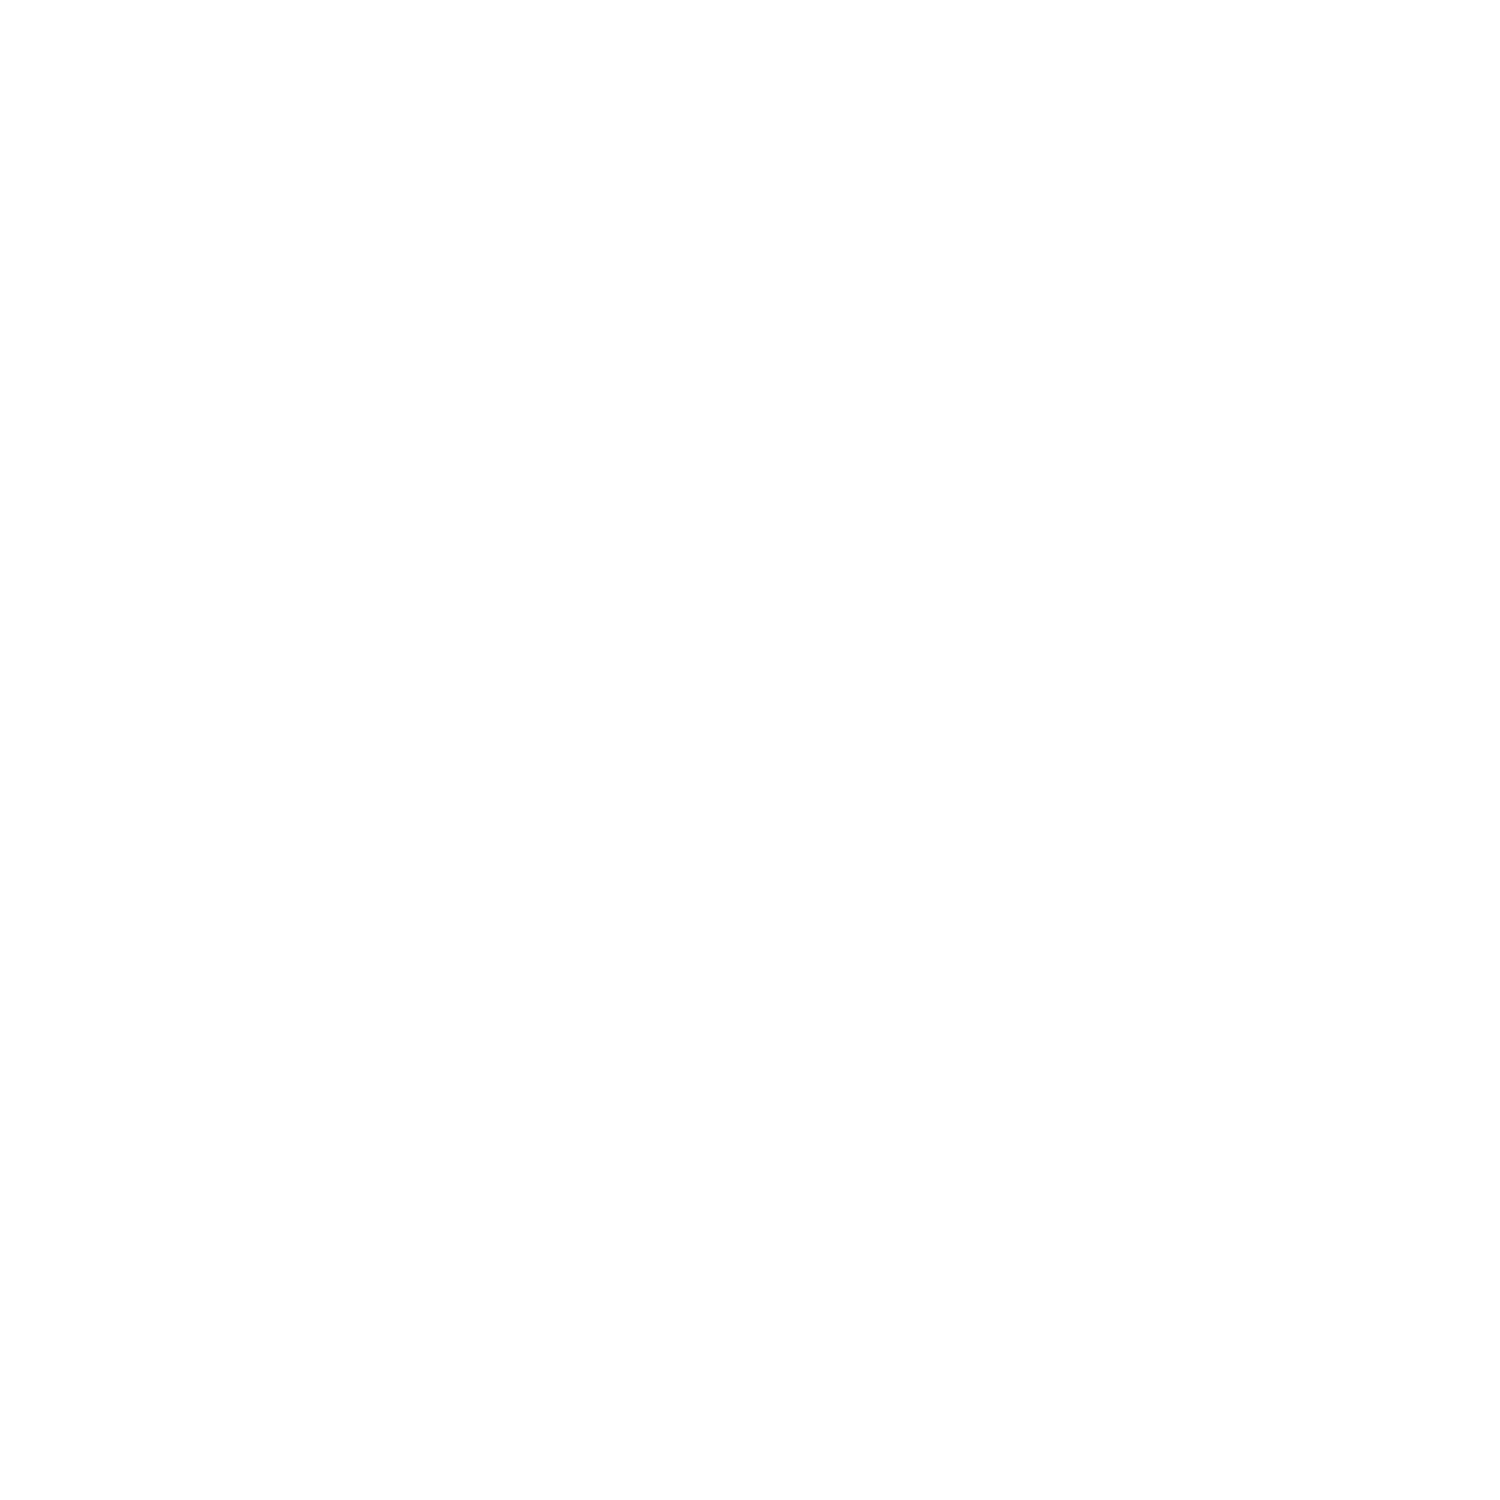 Street Lamp Productions